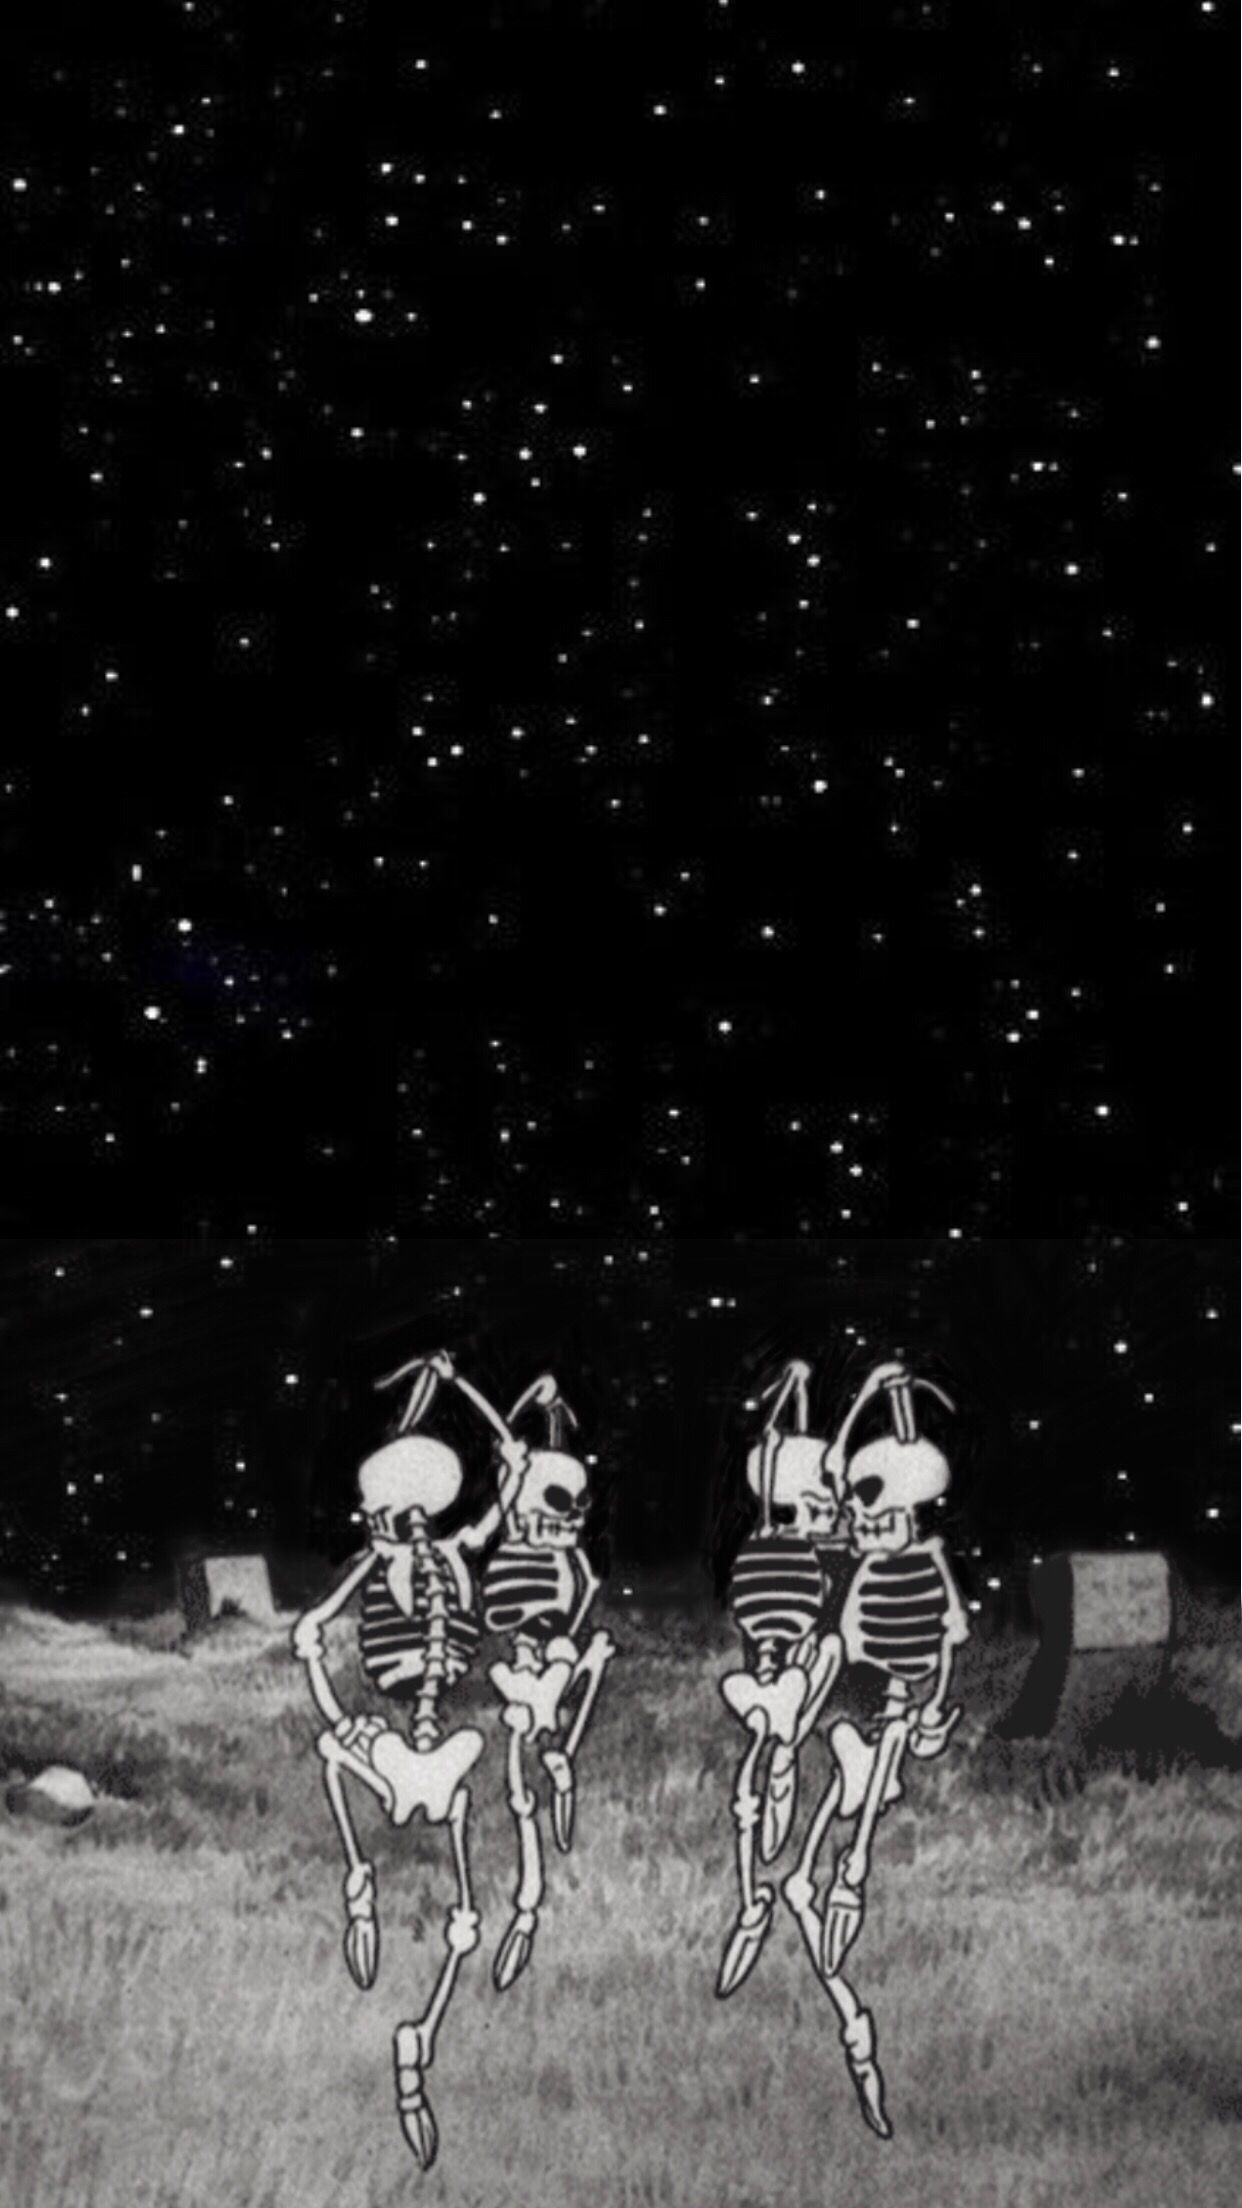 Two skeletons sit on a bench under a starry sky. - Creepy, skeleton, horror, spooky